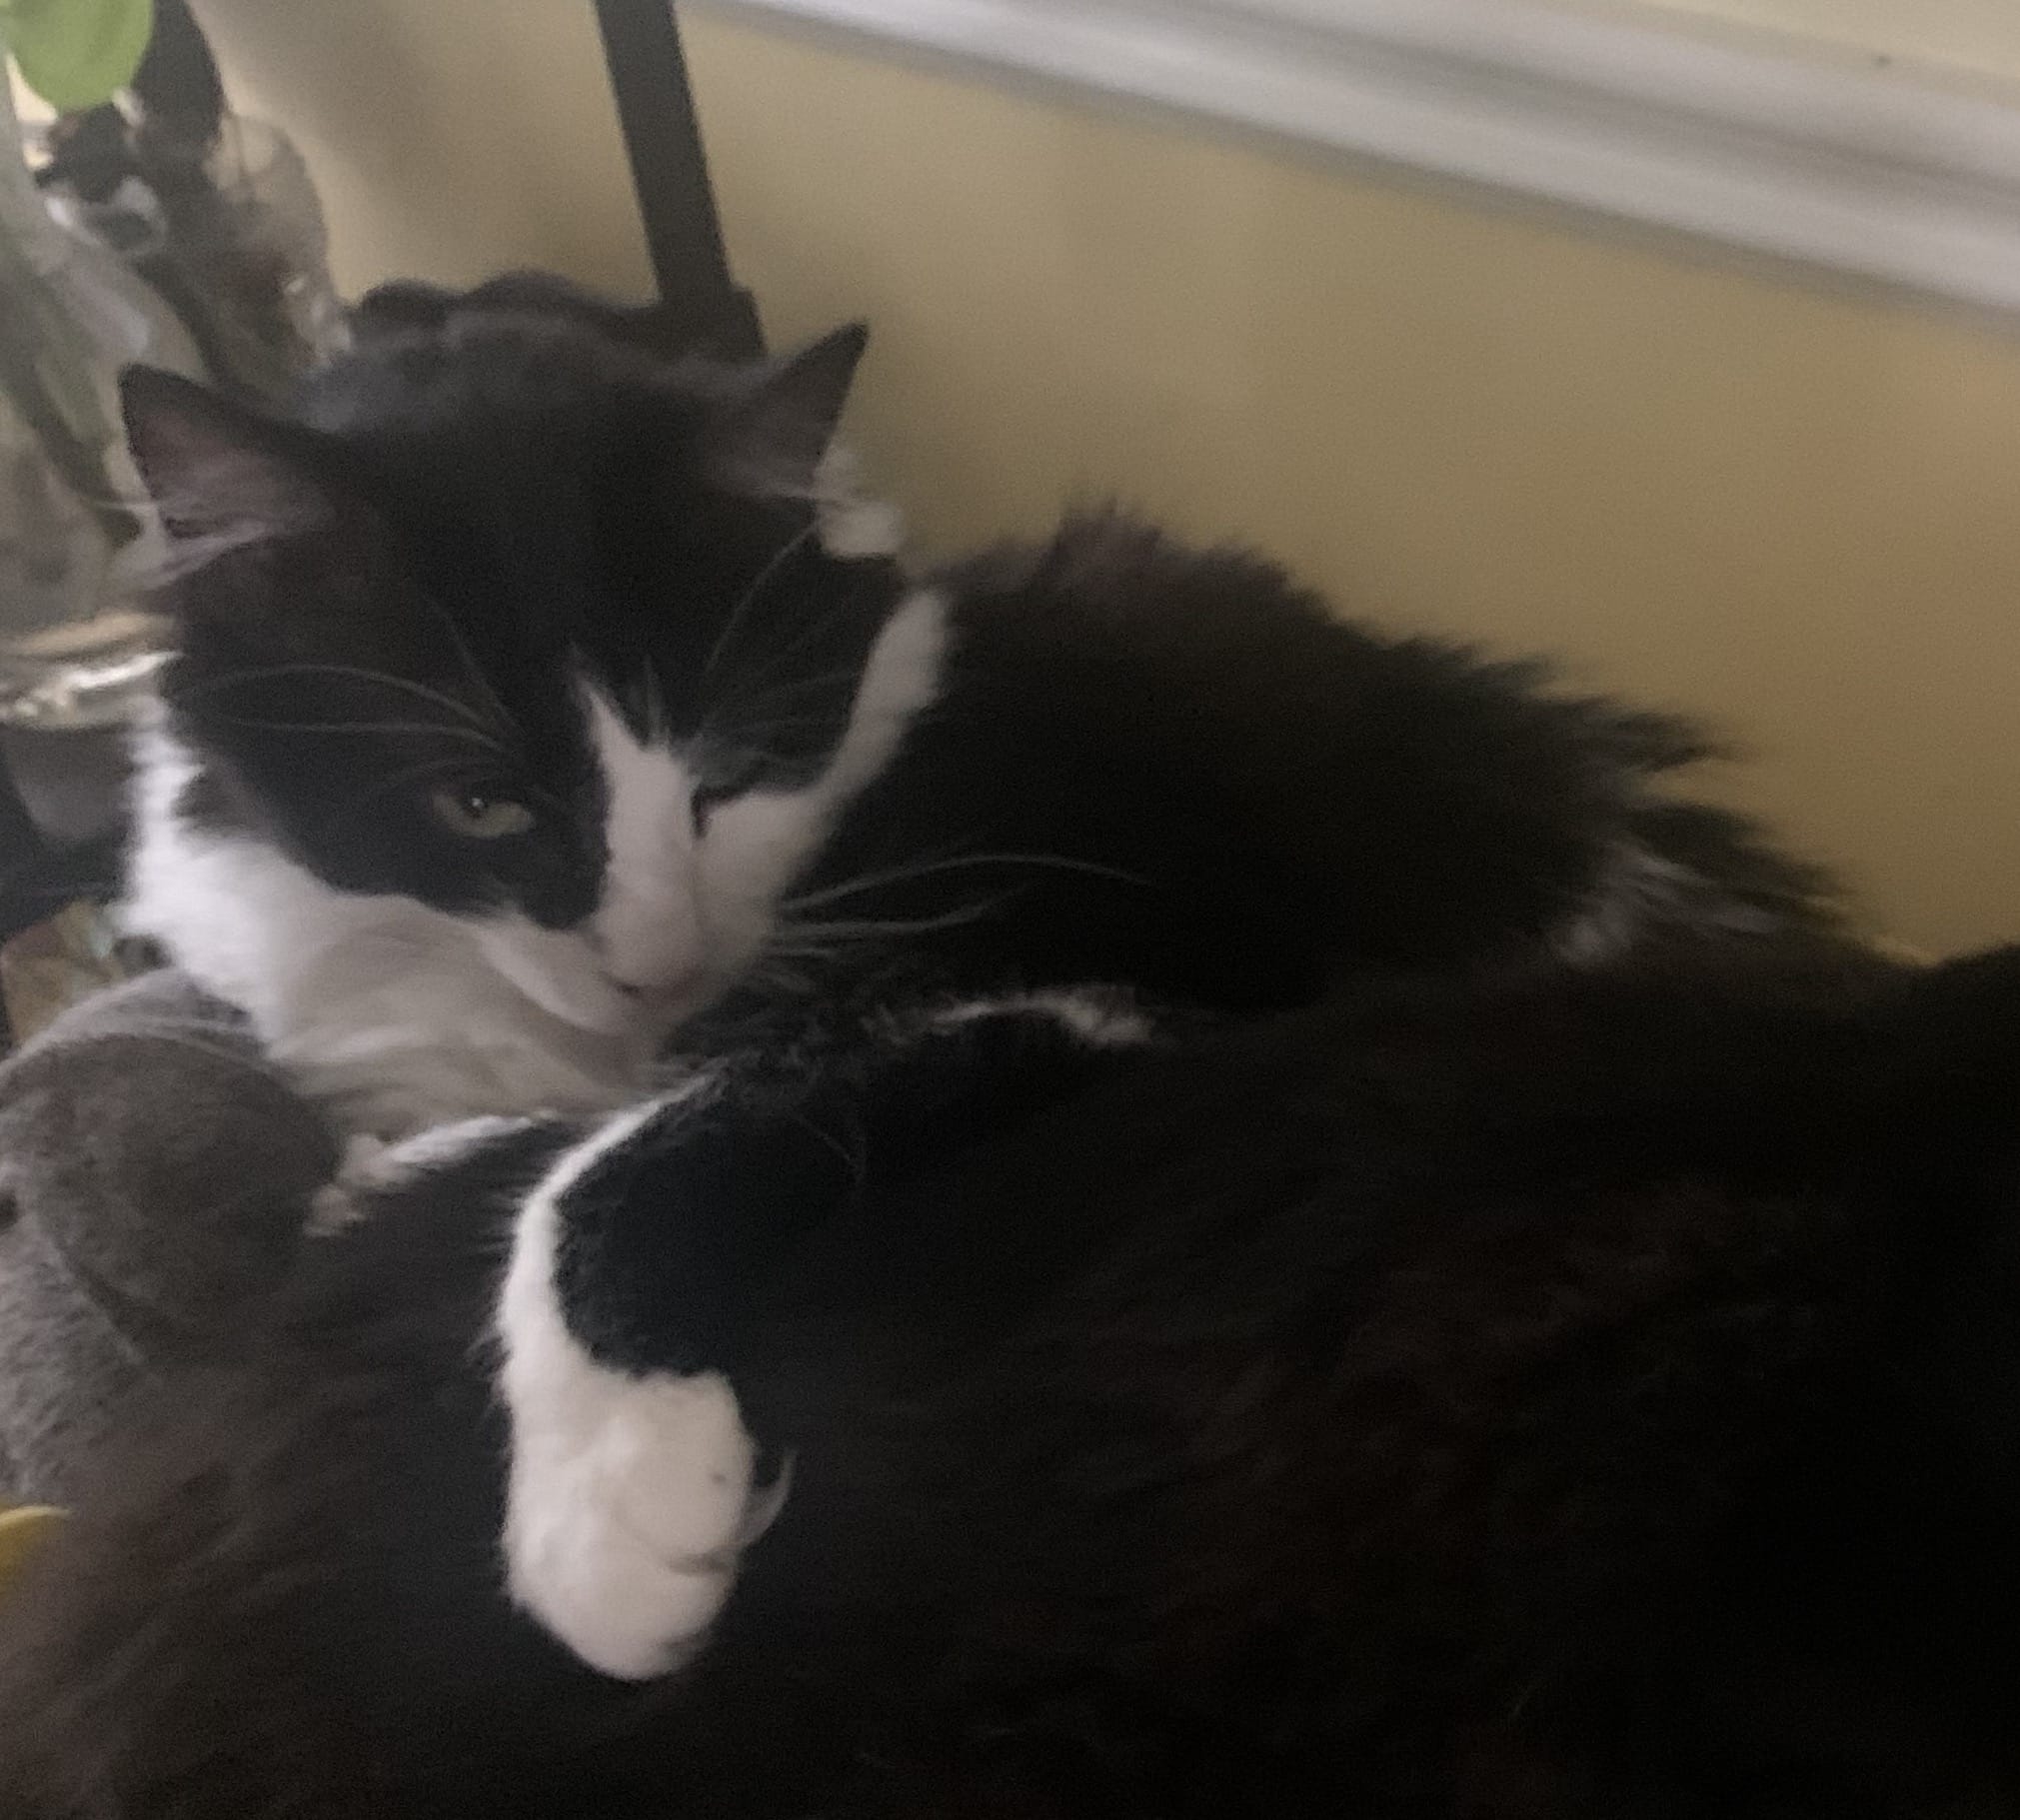 Tater the cat cuddling with his cat sibling